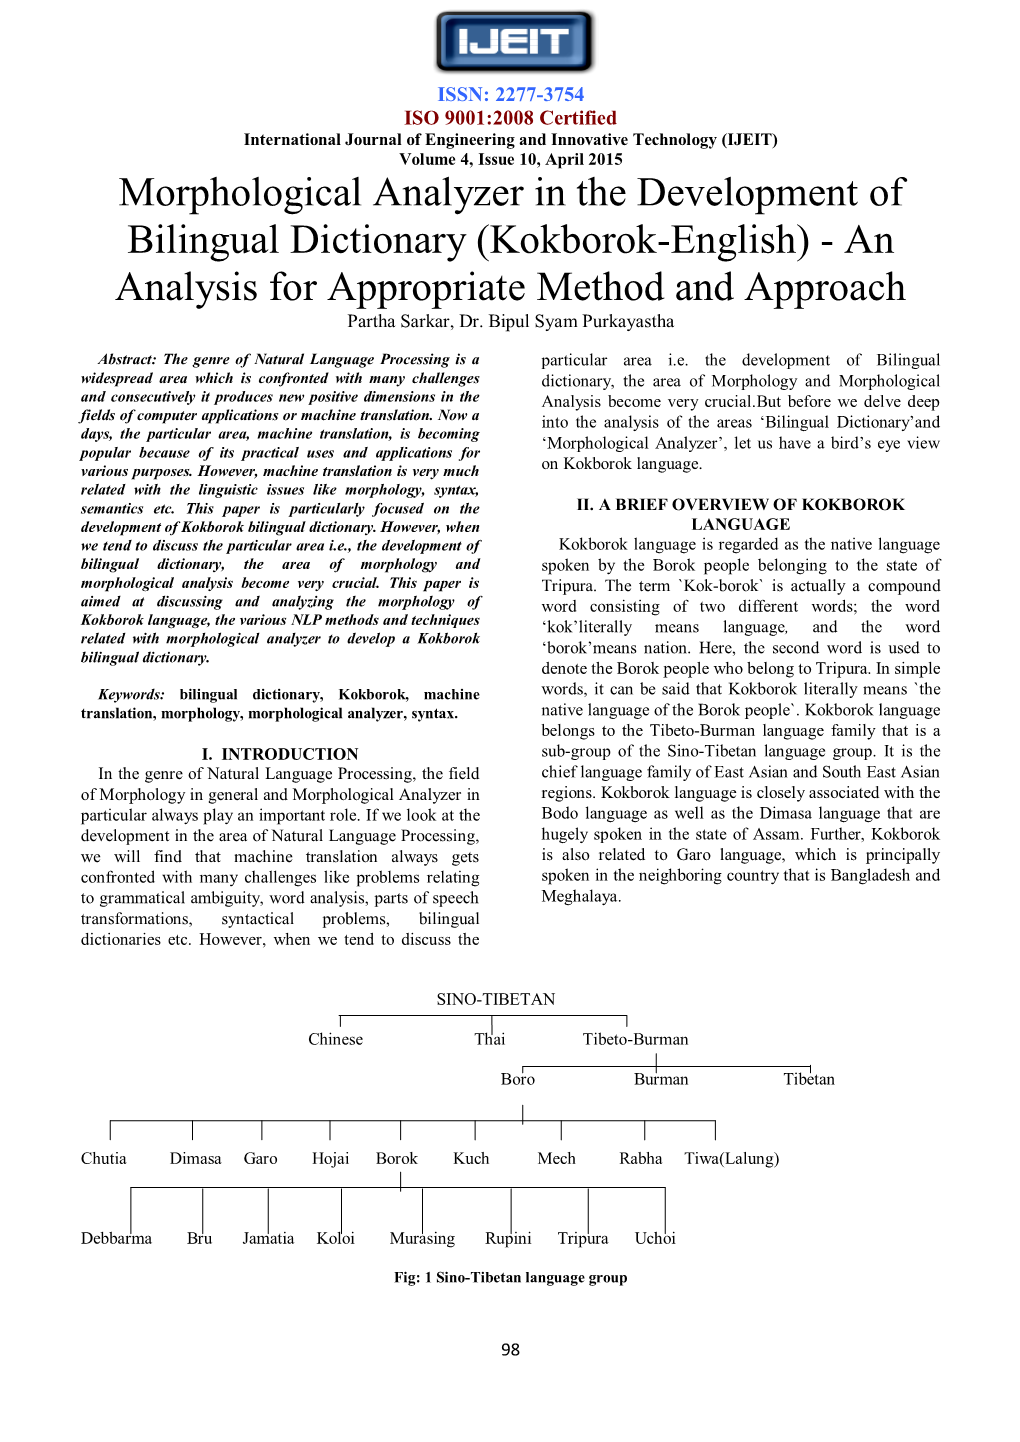 Morphological Analyzer in the Development of Bilingual Dictionary (Kokborok-English) - an Analysis for Appropriate Method and Approach Partha Sarkar, Dr